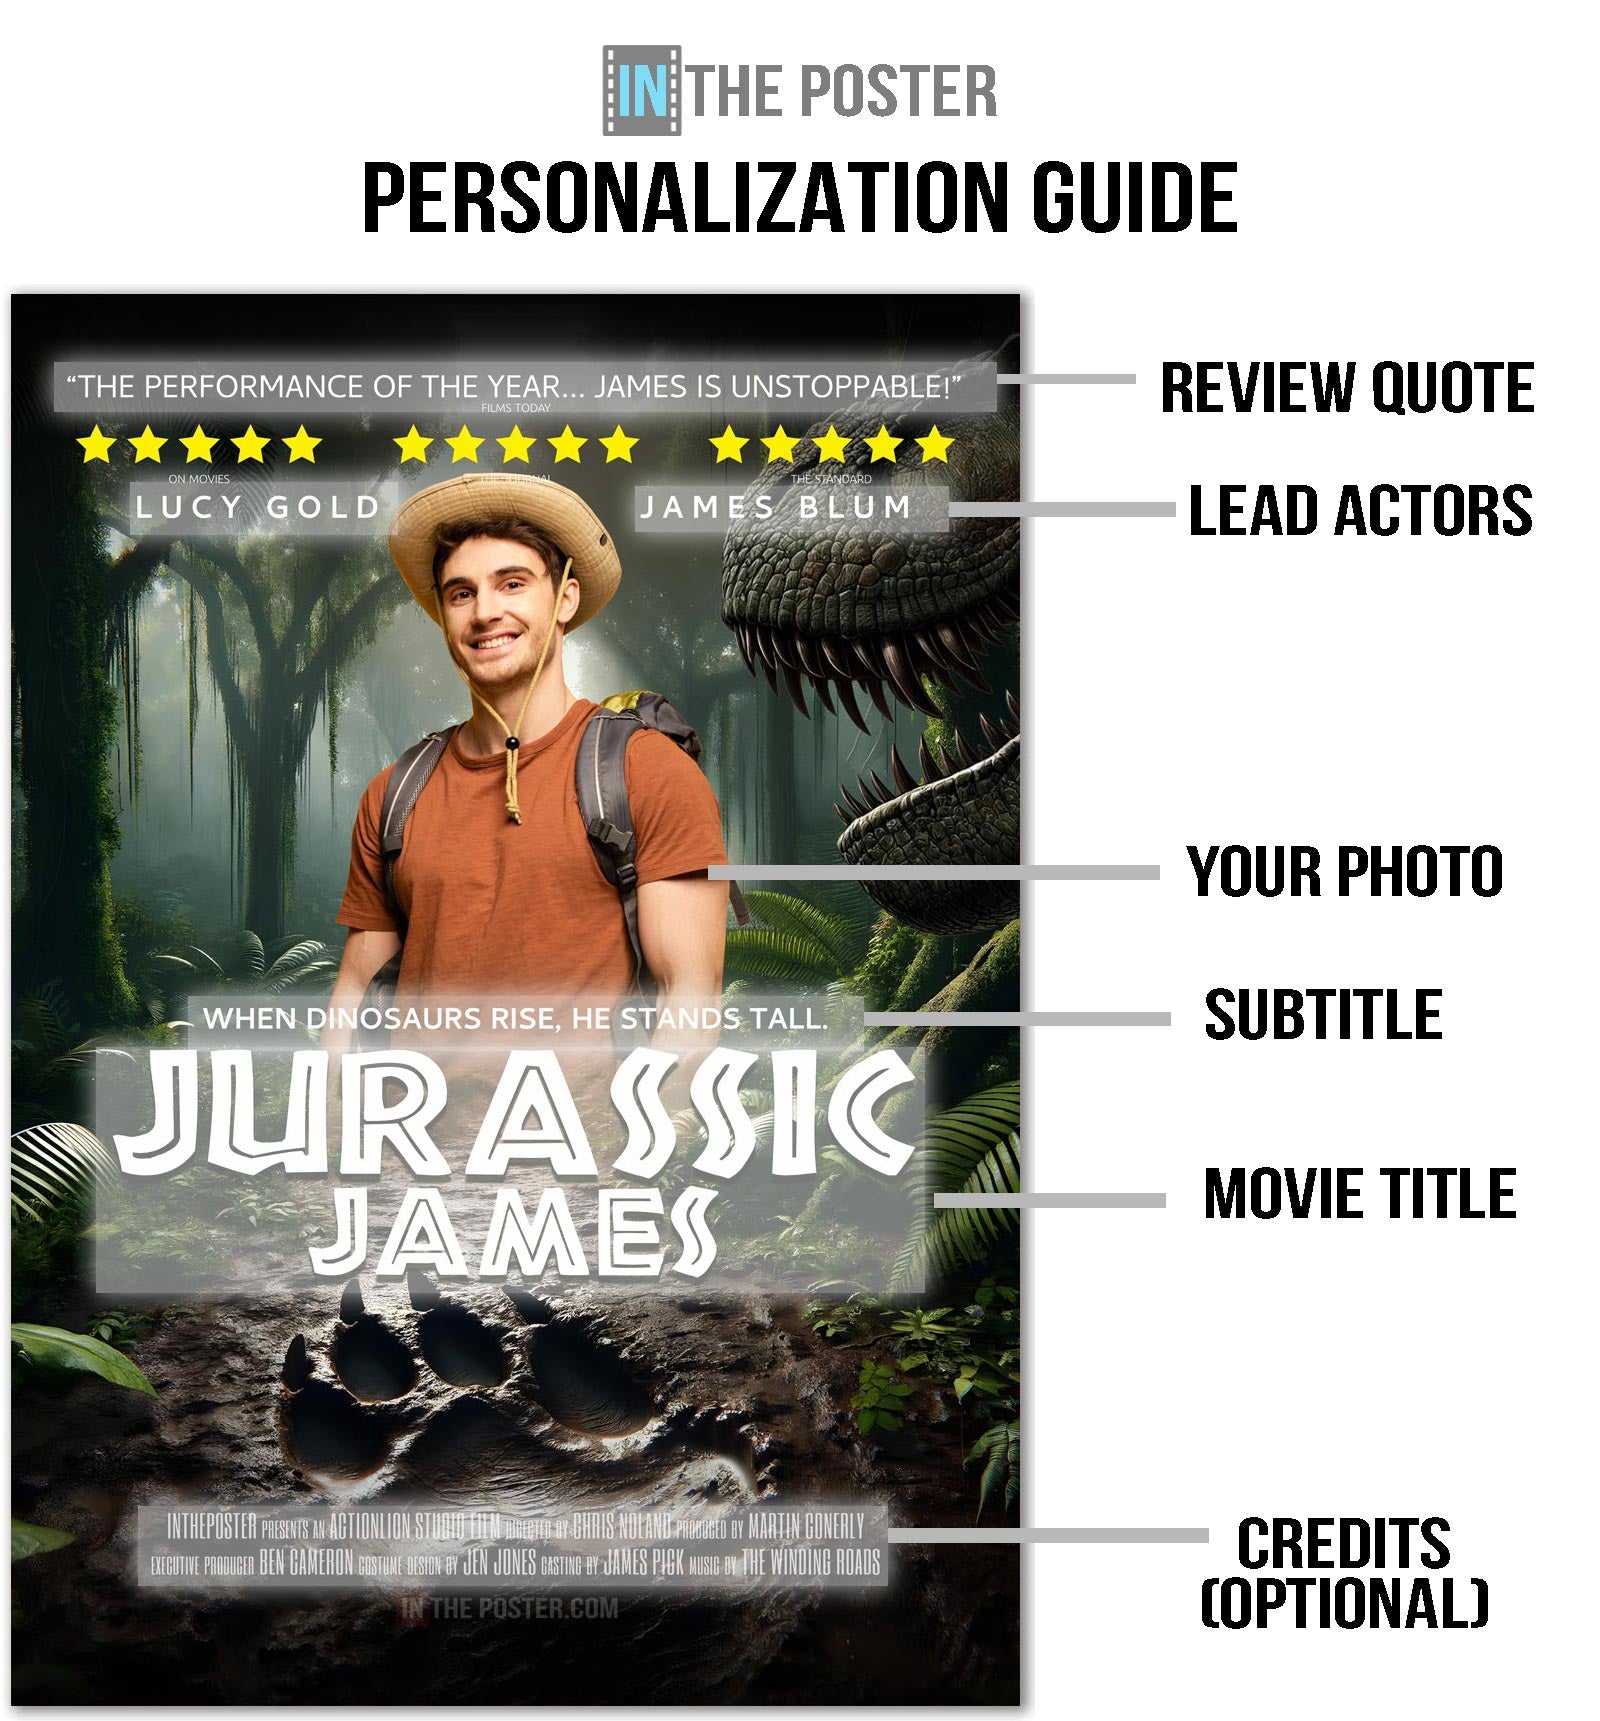 A guide showing how to personalise your own movie poster, featuring a dinosaur movie poster with a man in an orange t-shirt and t-rex.